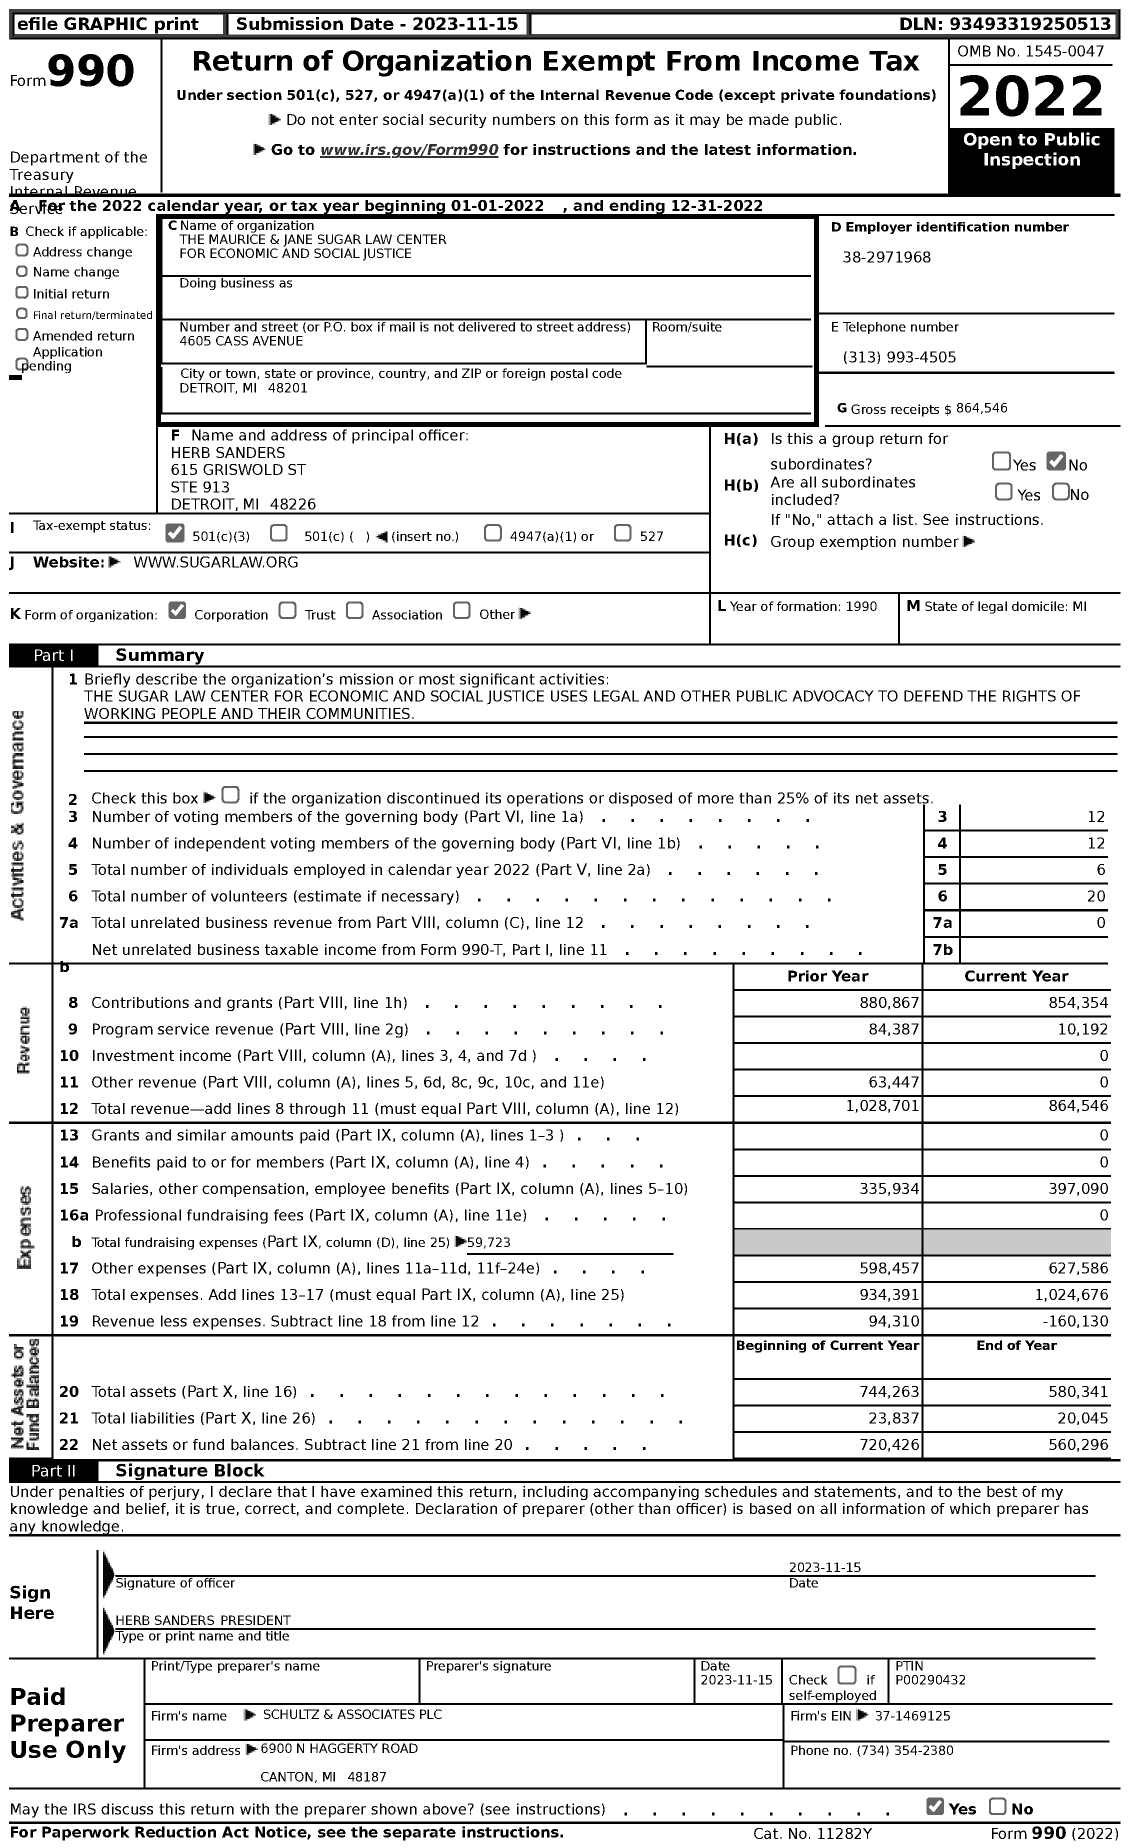 Image of first page of 2022 Form 990 for The Maurice and Jane Sugar Law Center for Economic and Social Justice